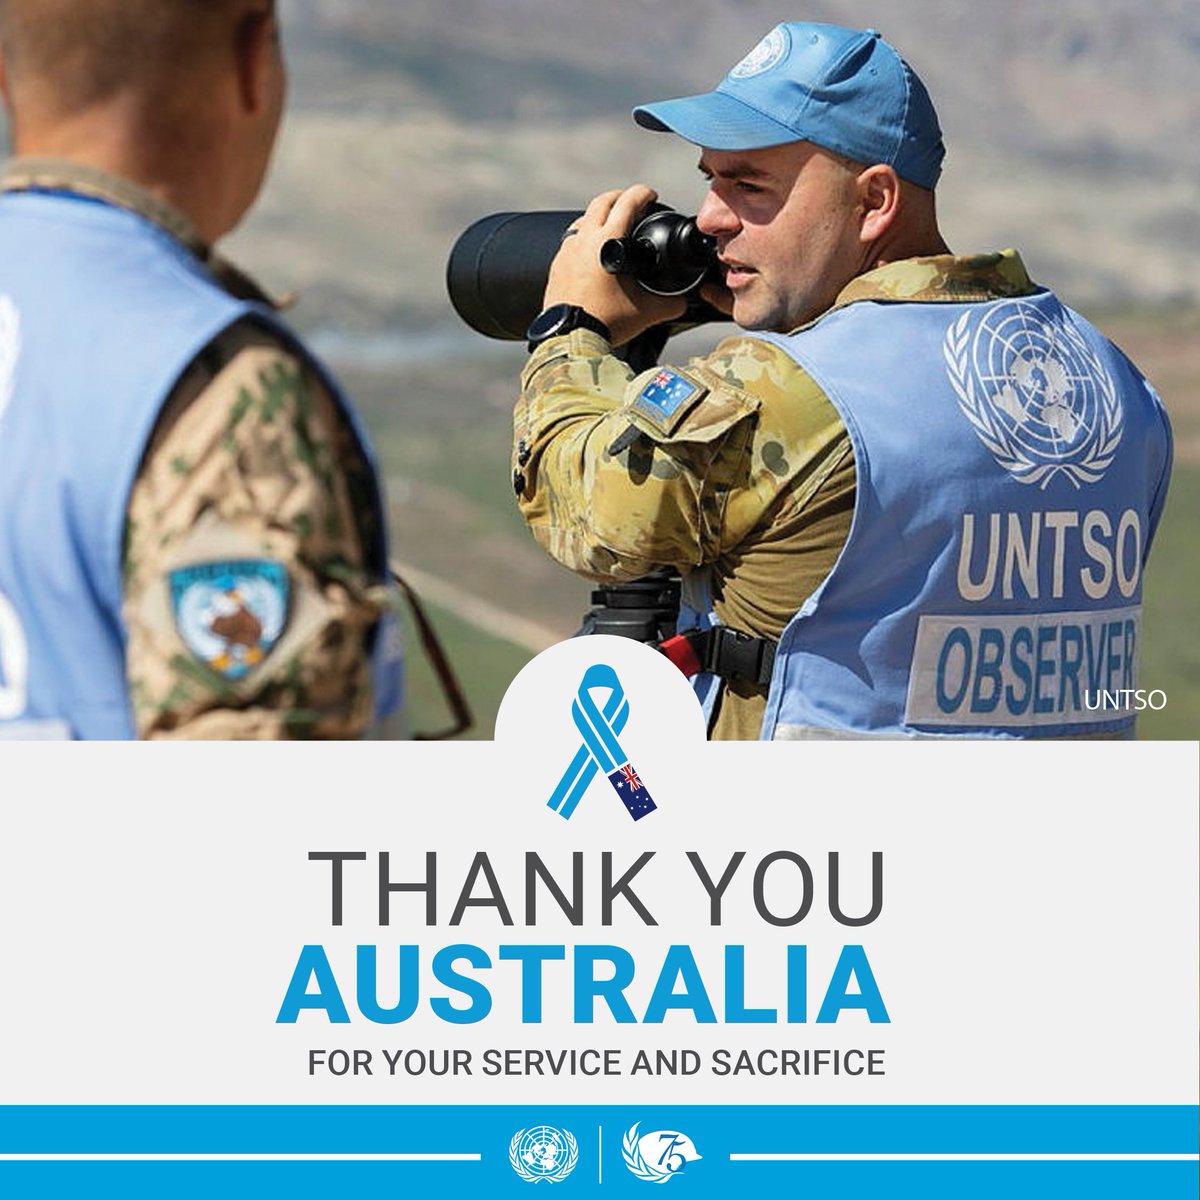 UN peacekeepers from Australia are #ServingForPeace with @UNPeacekeeping, leaving their families behind to protect the most vulnerable.

We thank them for their service & sacrifice. peacekeeping.un.org/en/service-and…